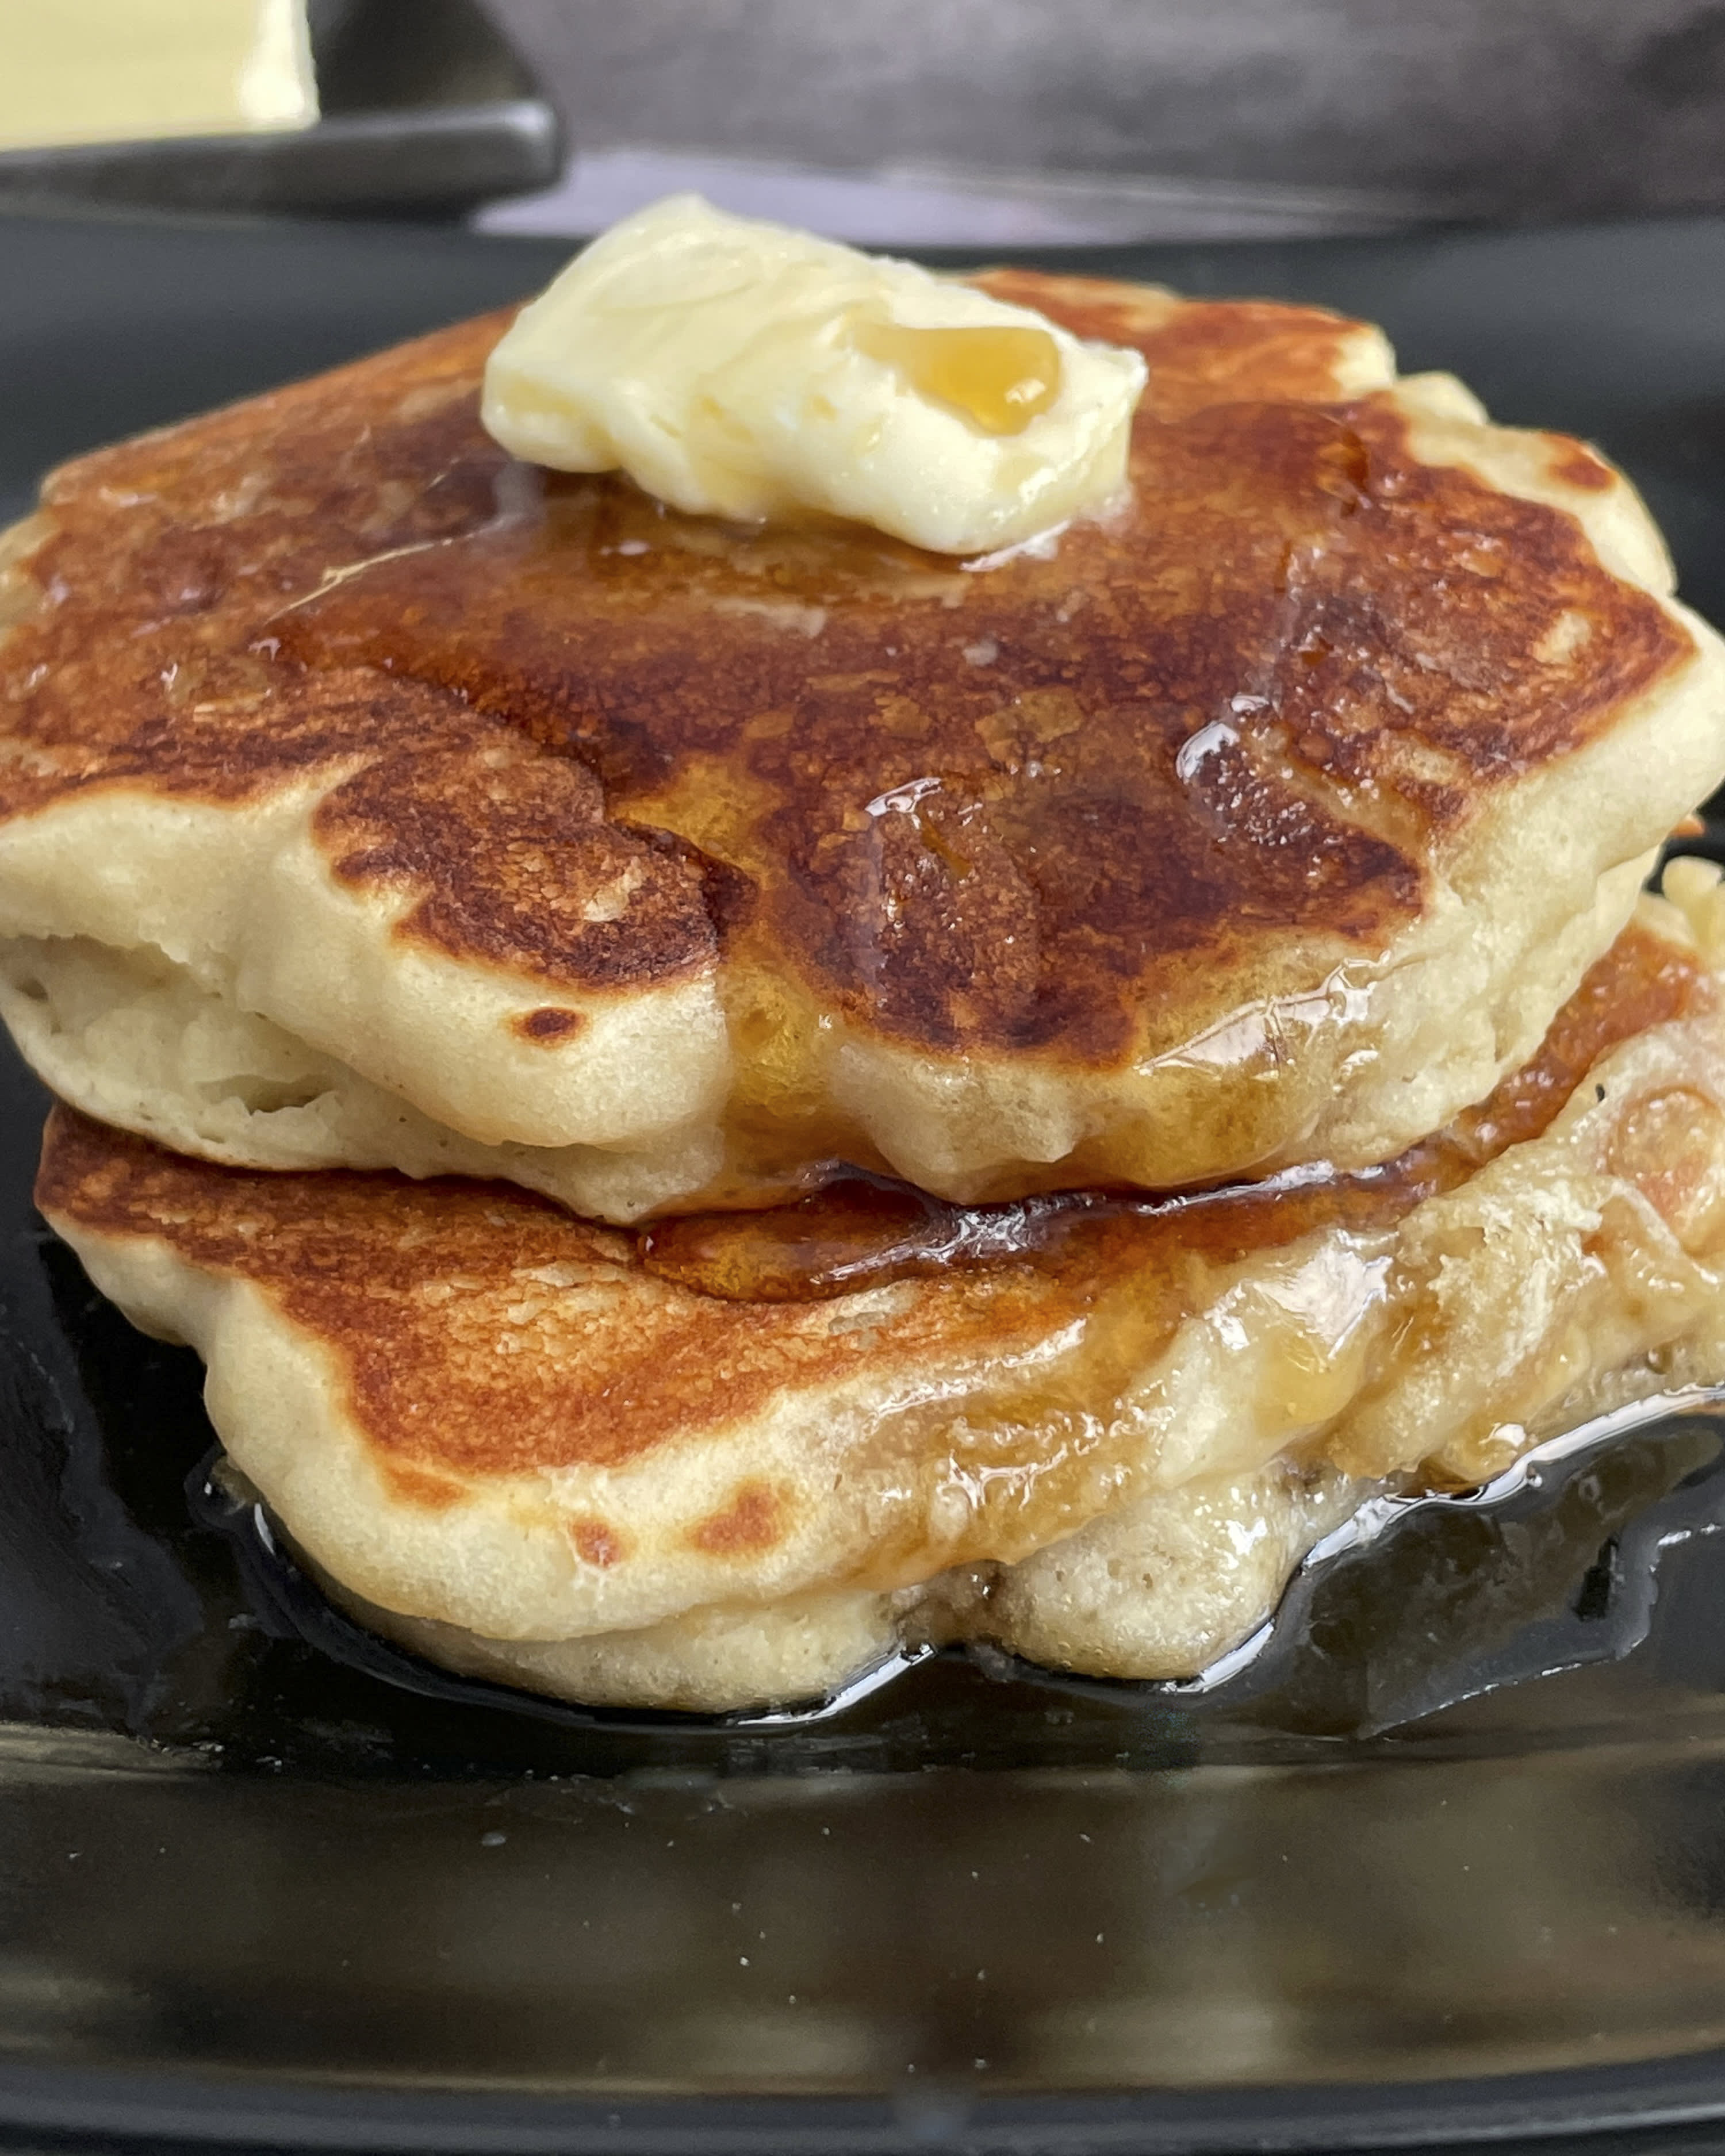 Gramma's Griddle Cakes + Video